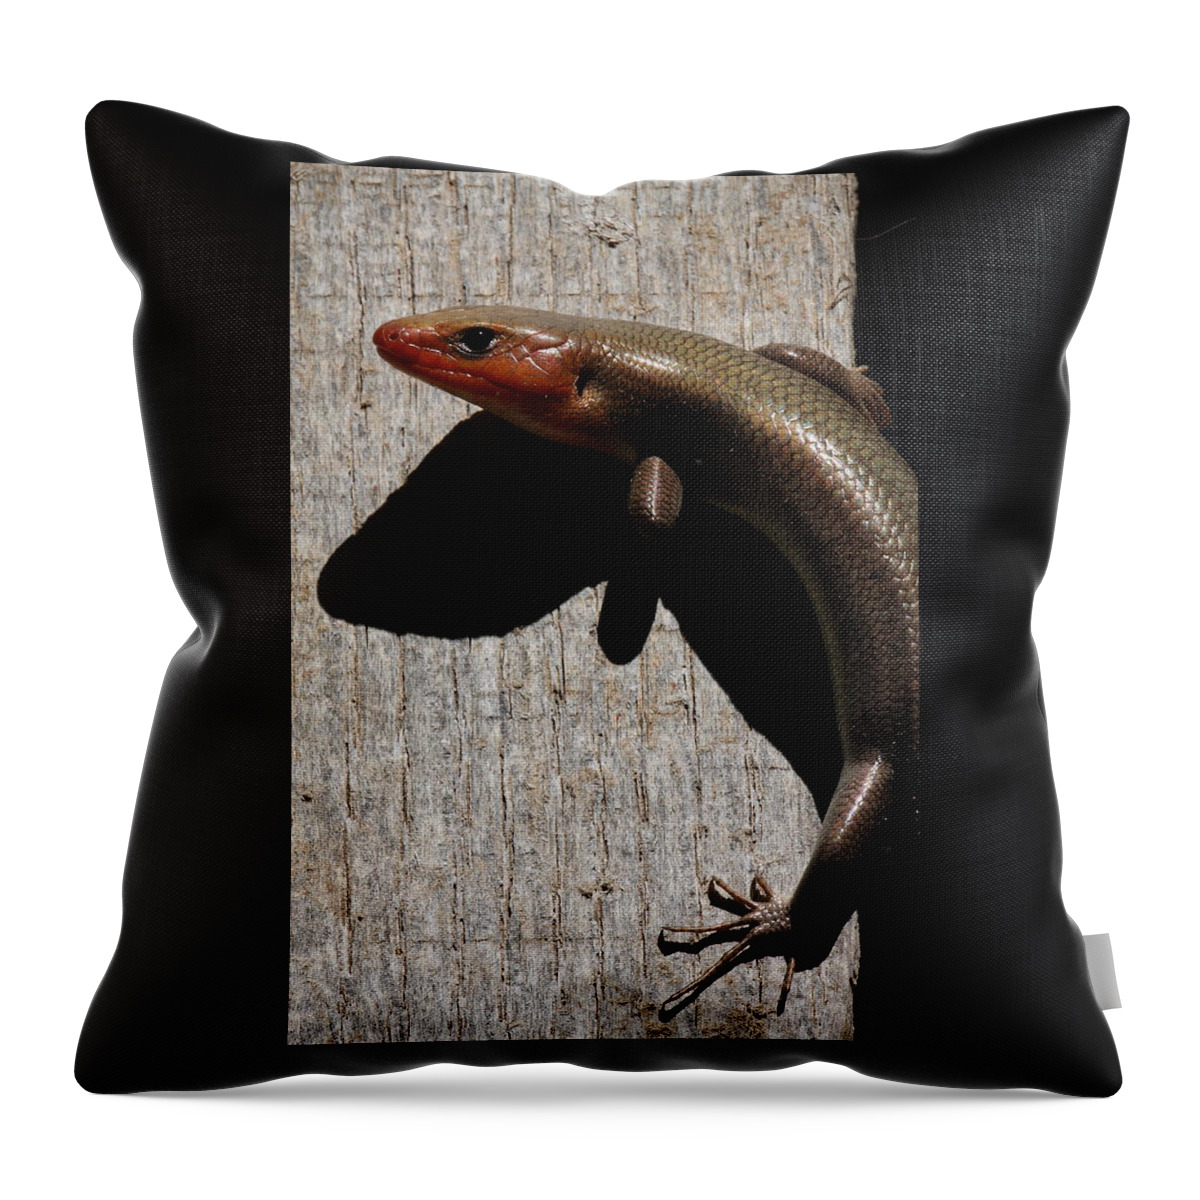 Broad-headed Skink Throw Pillow featuring the photograph Broad-headed Skink On Barn by Daniel Reed